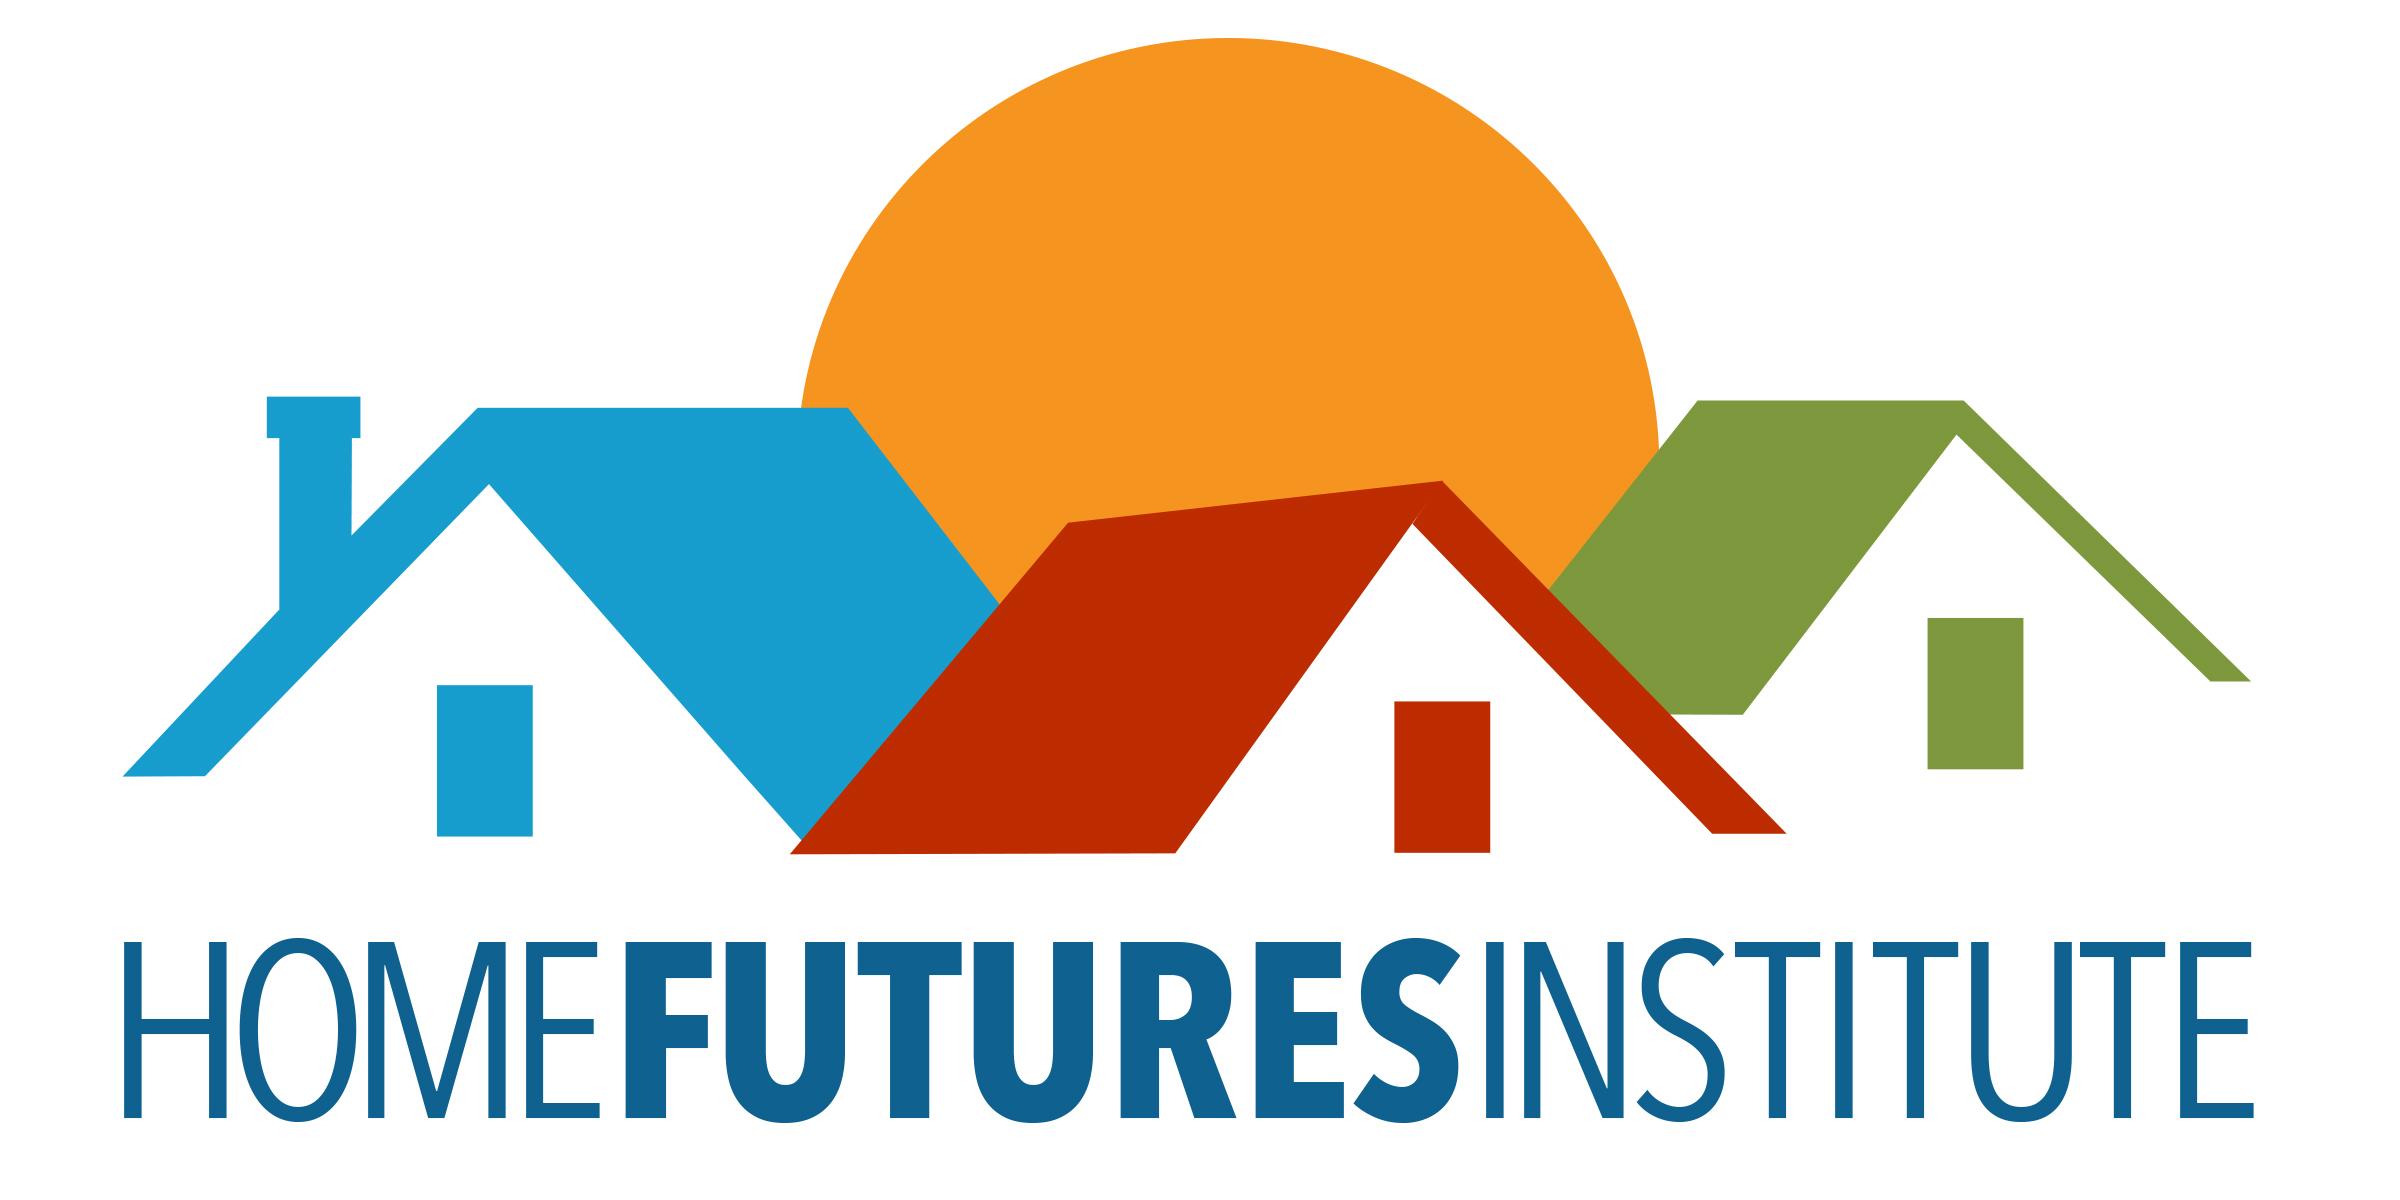 Home Futures Institute logo with homes and sun